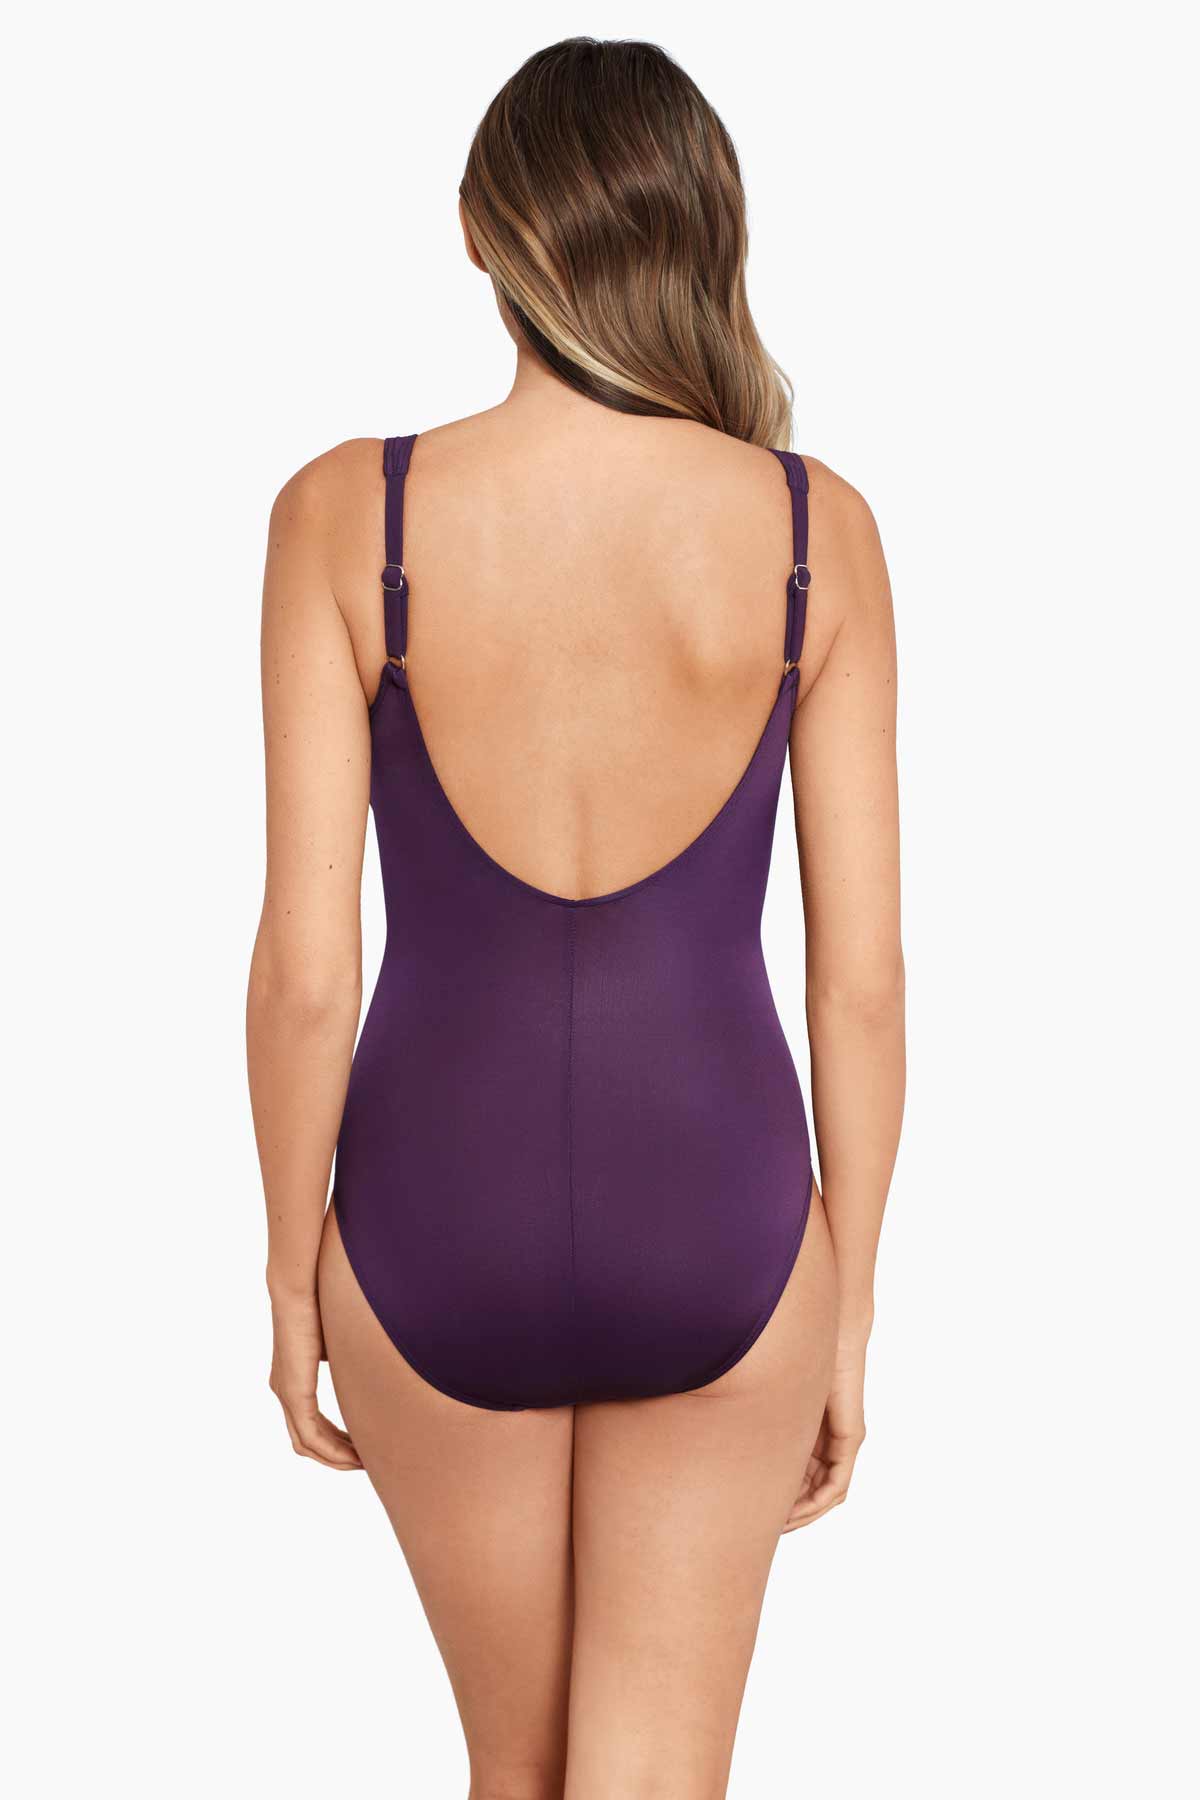 Miraclesuit Sub Rosa Sanibel One Piece Swimsuit DDD-Cup